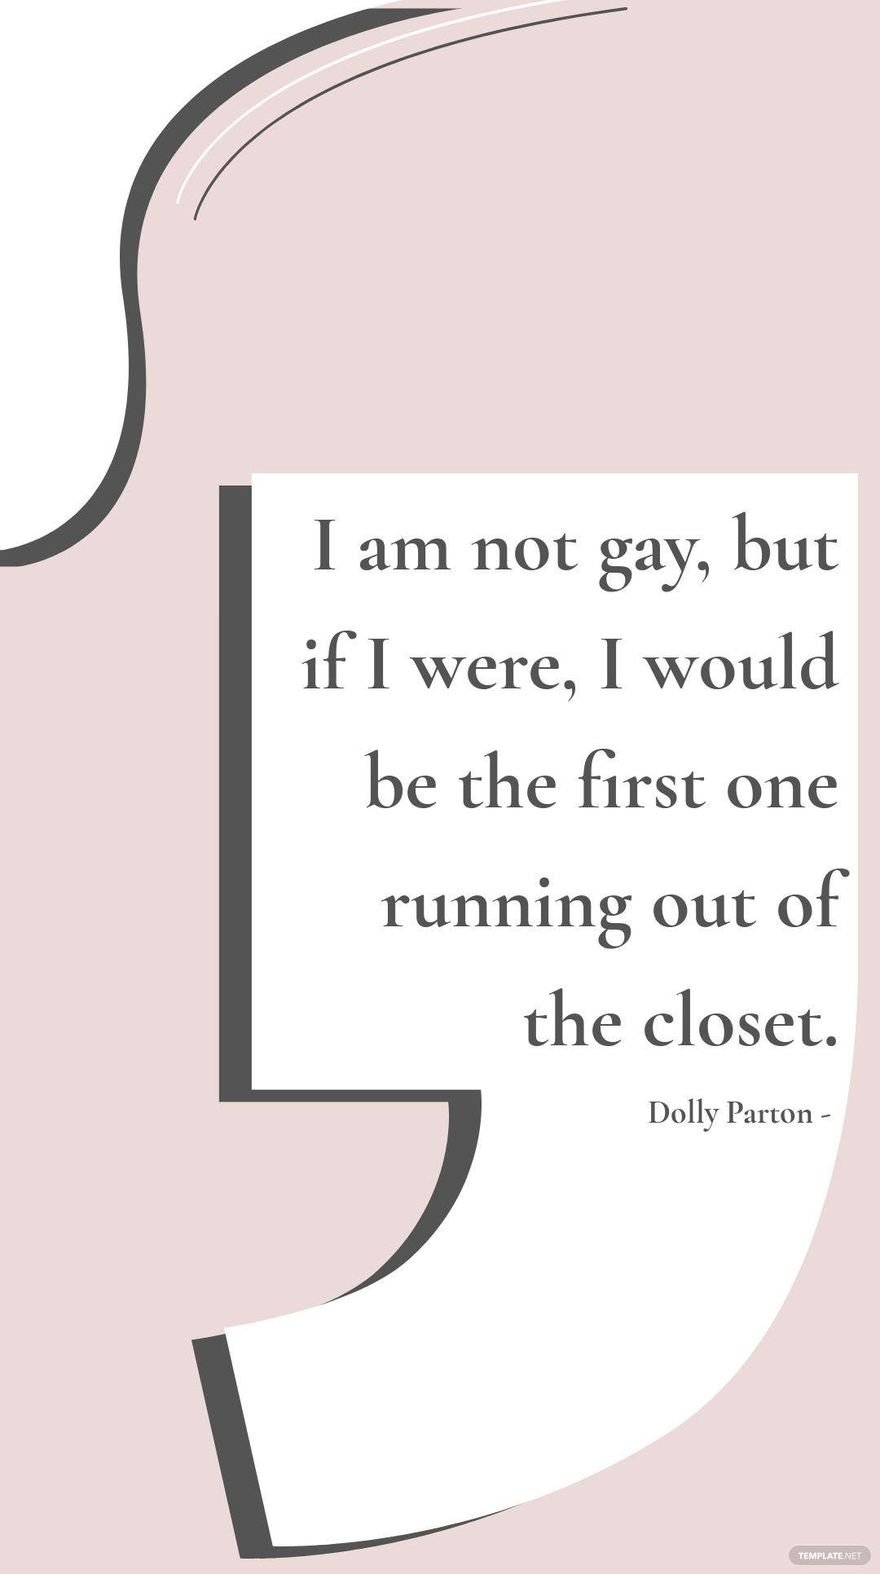 Dolly Parton - I am not gay, but if I were, I would be the first one running out of the closet.